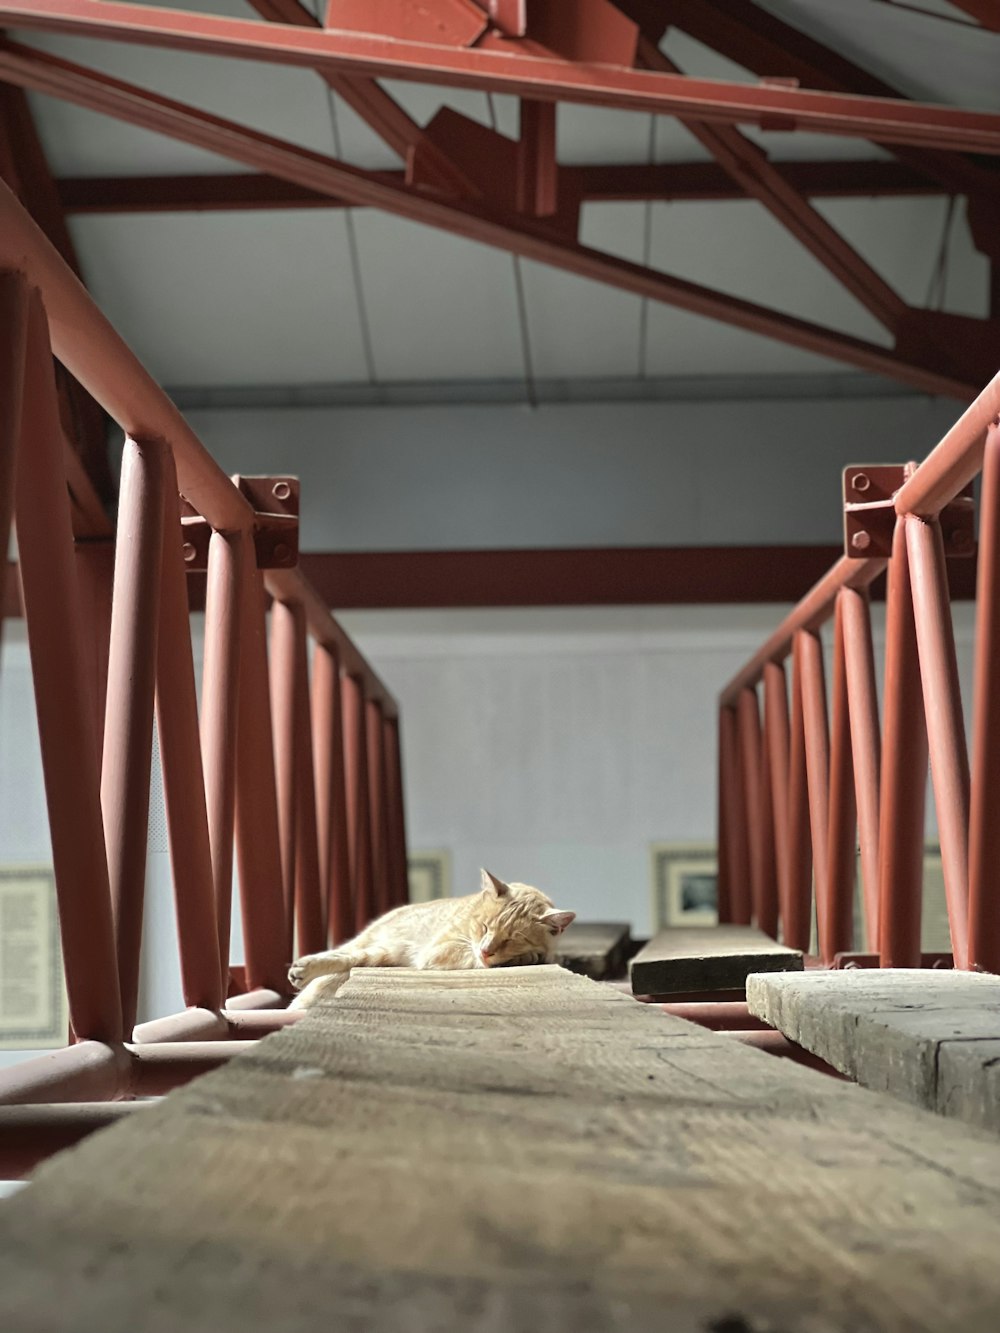 a cat laying on a wooden floor in a building